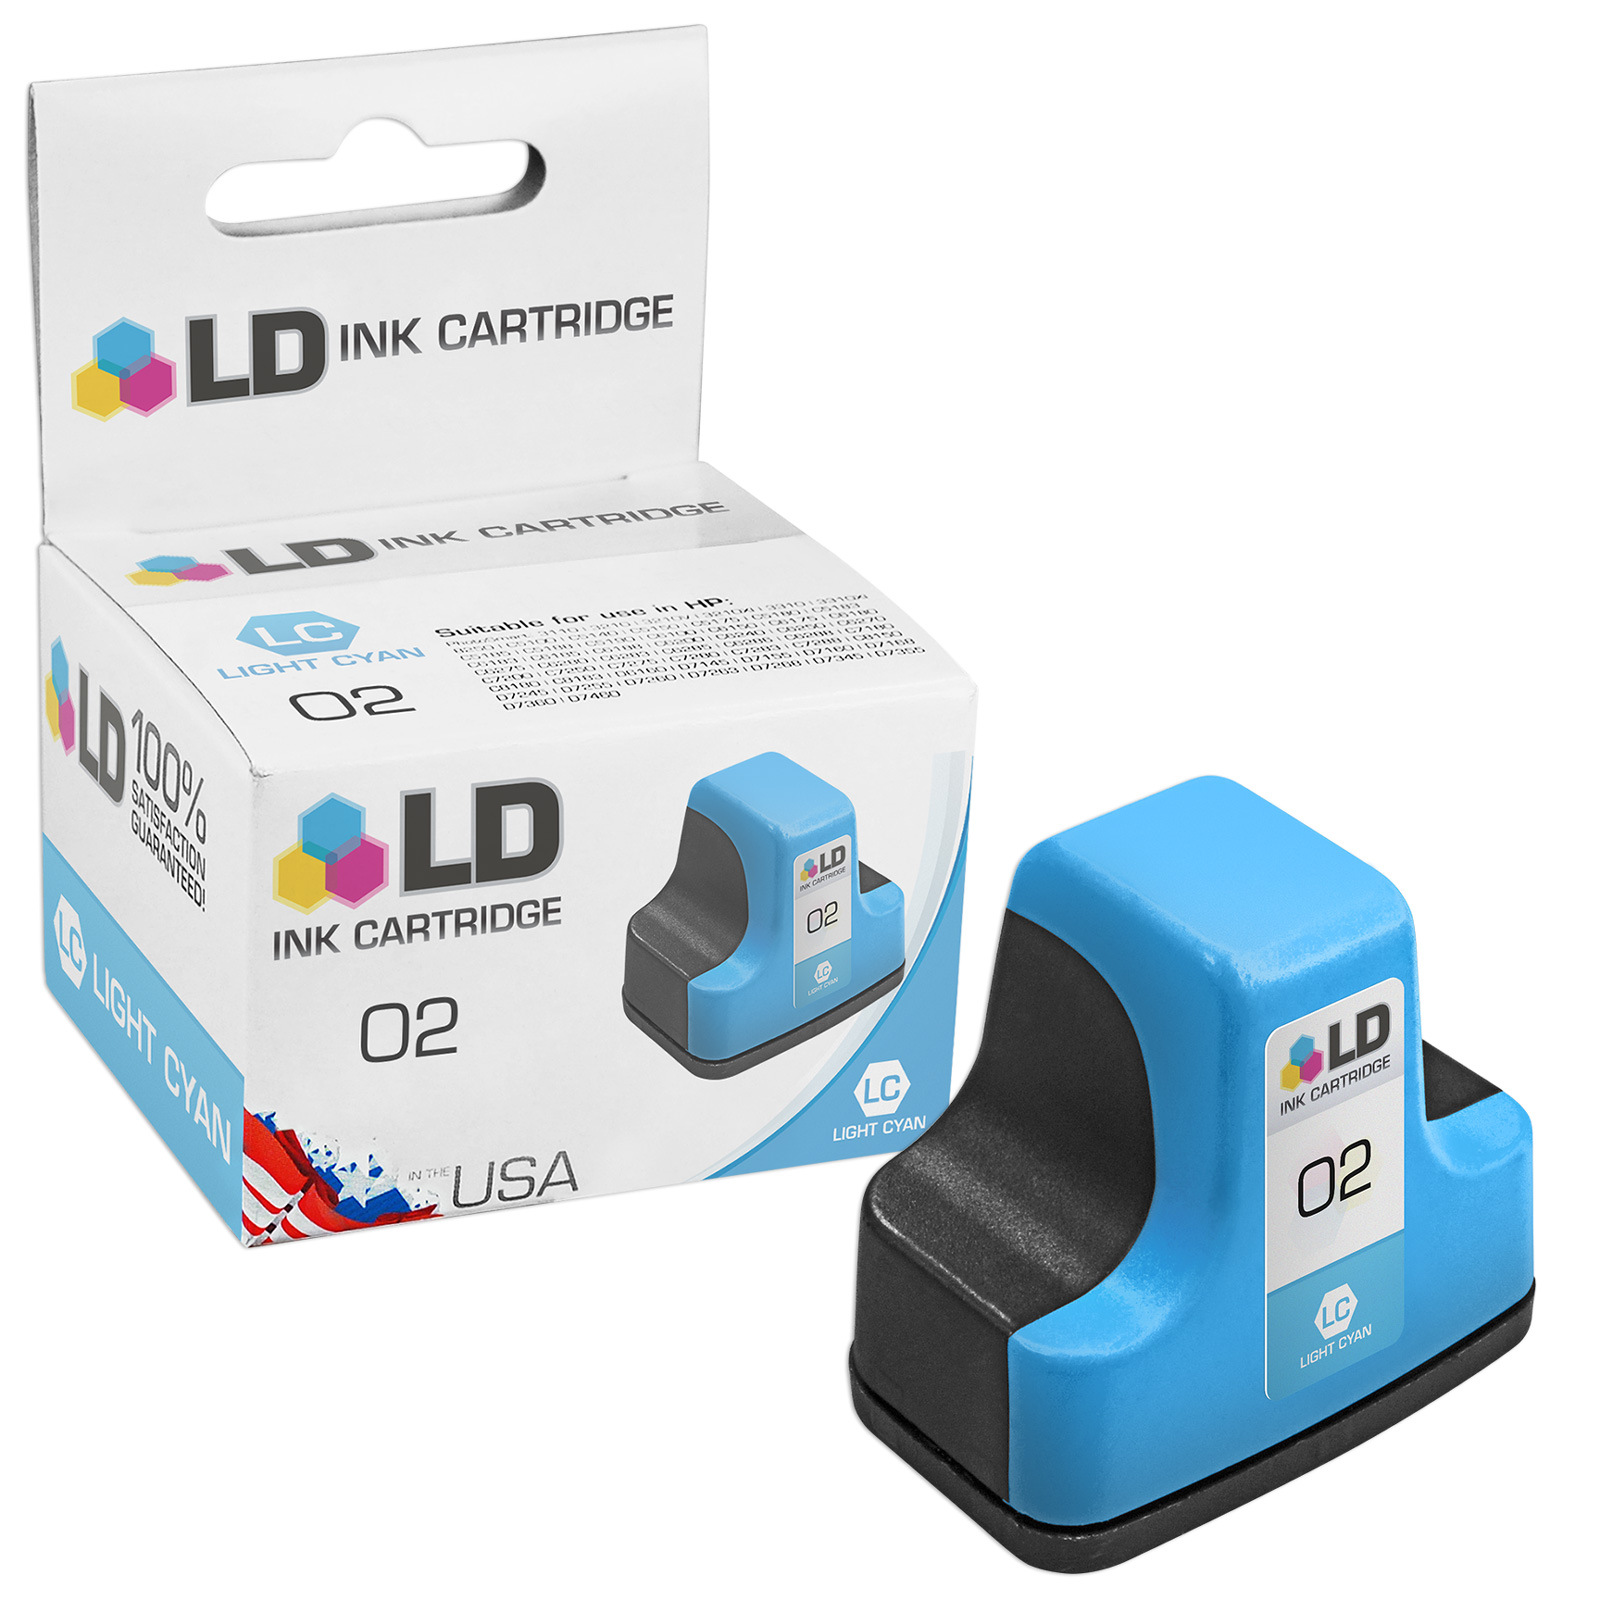 LD Remanufactured Replacement Ink Cartridge for Hewlett Packard C8774WN (HP 02) Light Cyan - image 2 of 2